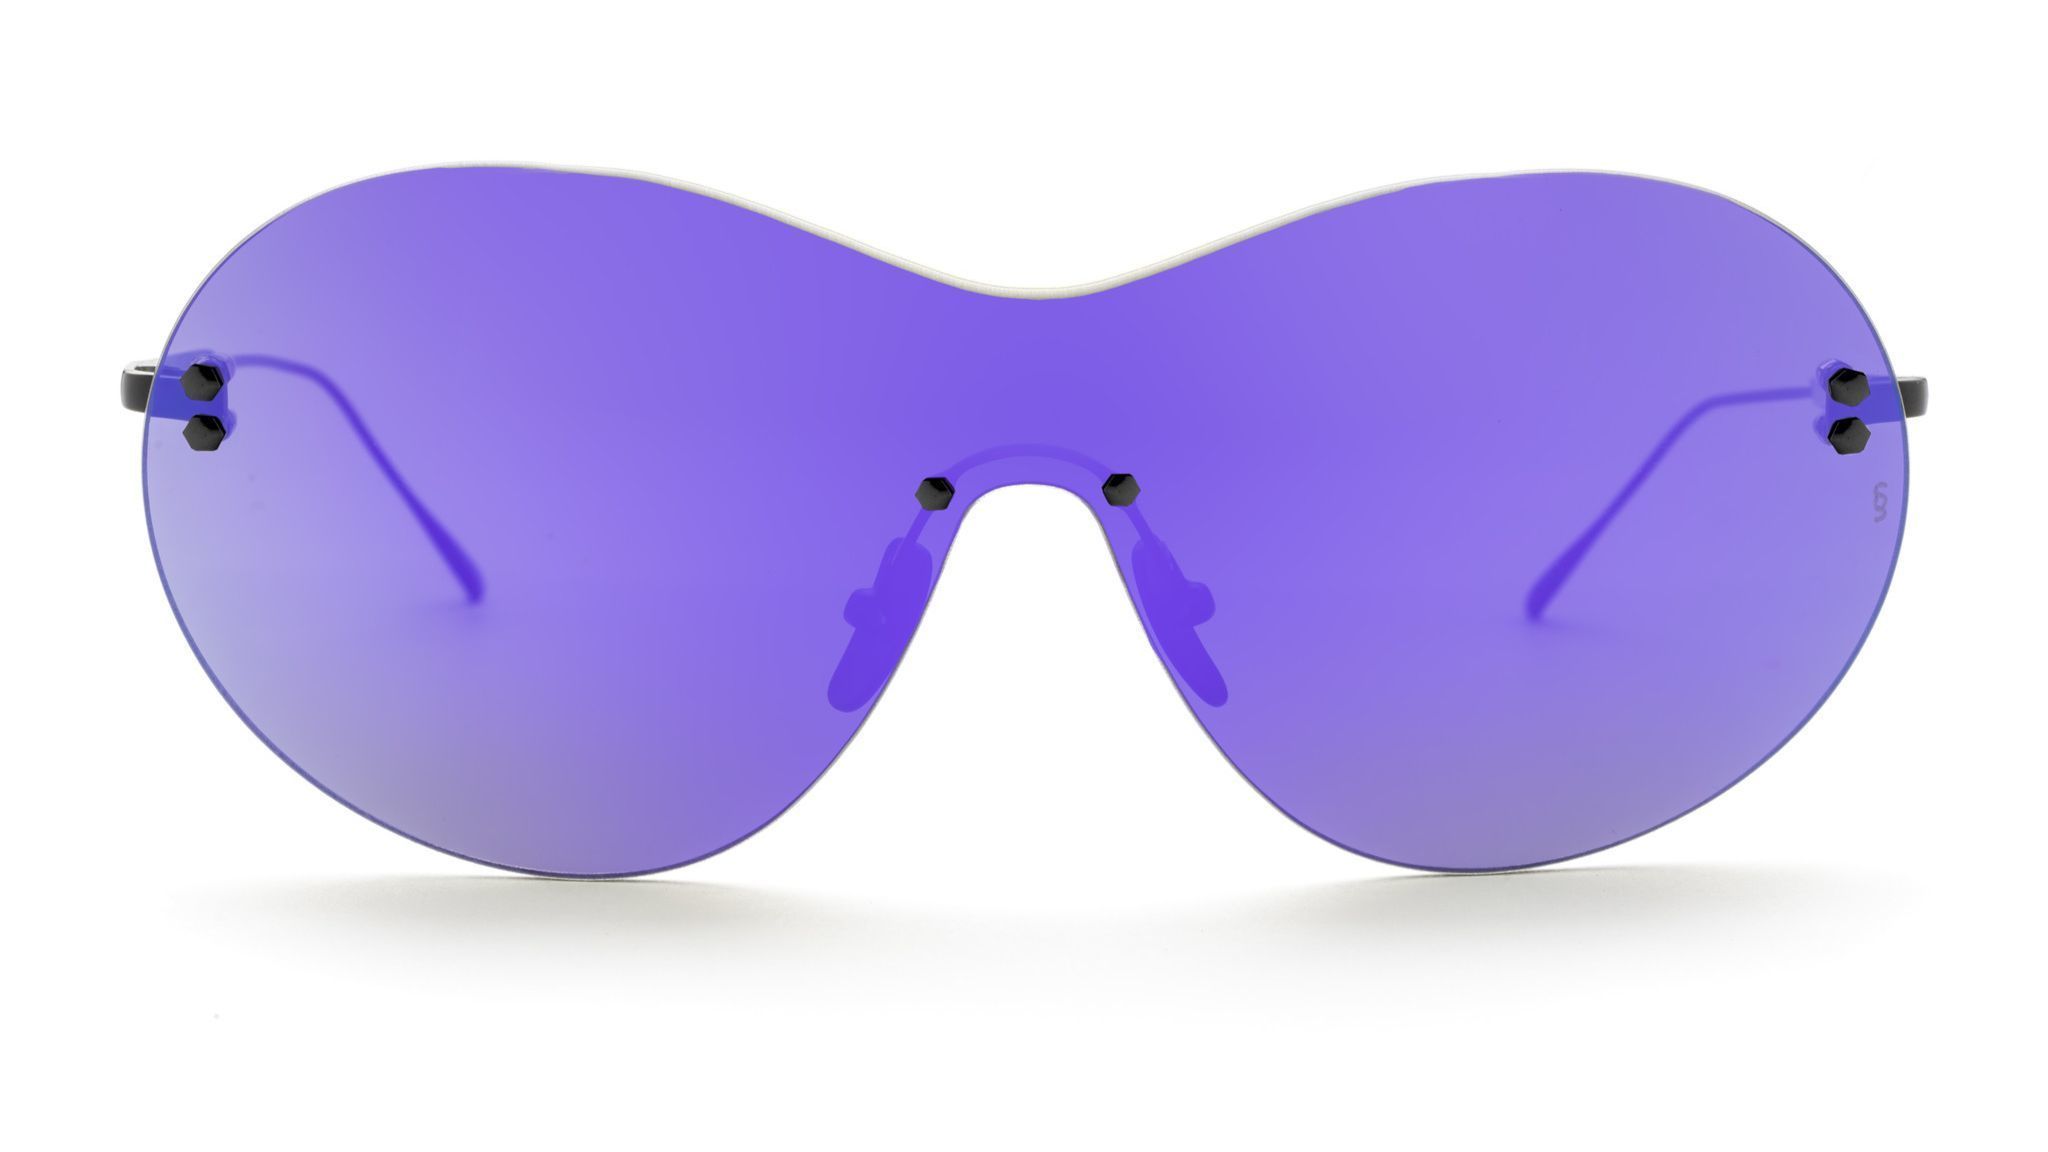 British brand Sunday Somewhere has these cool sunnies in a few colors.